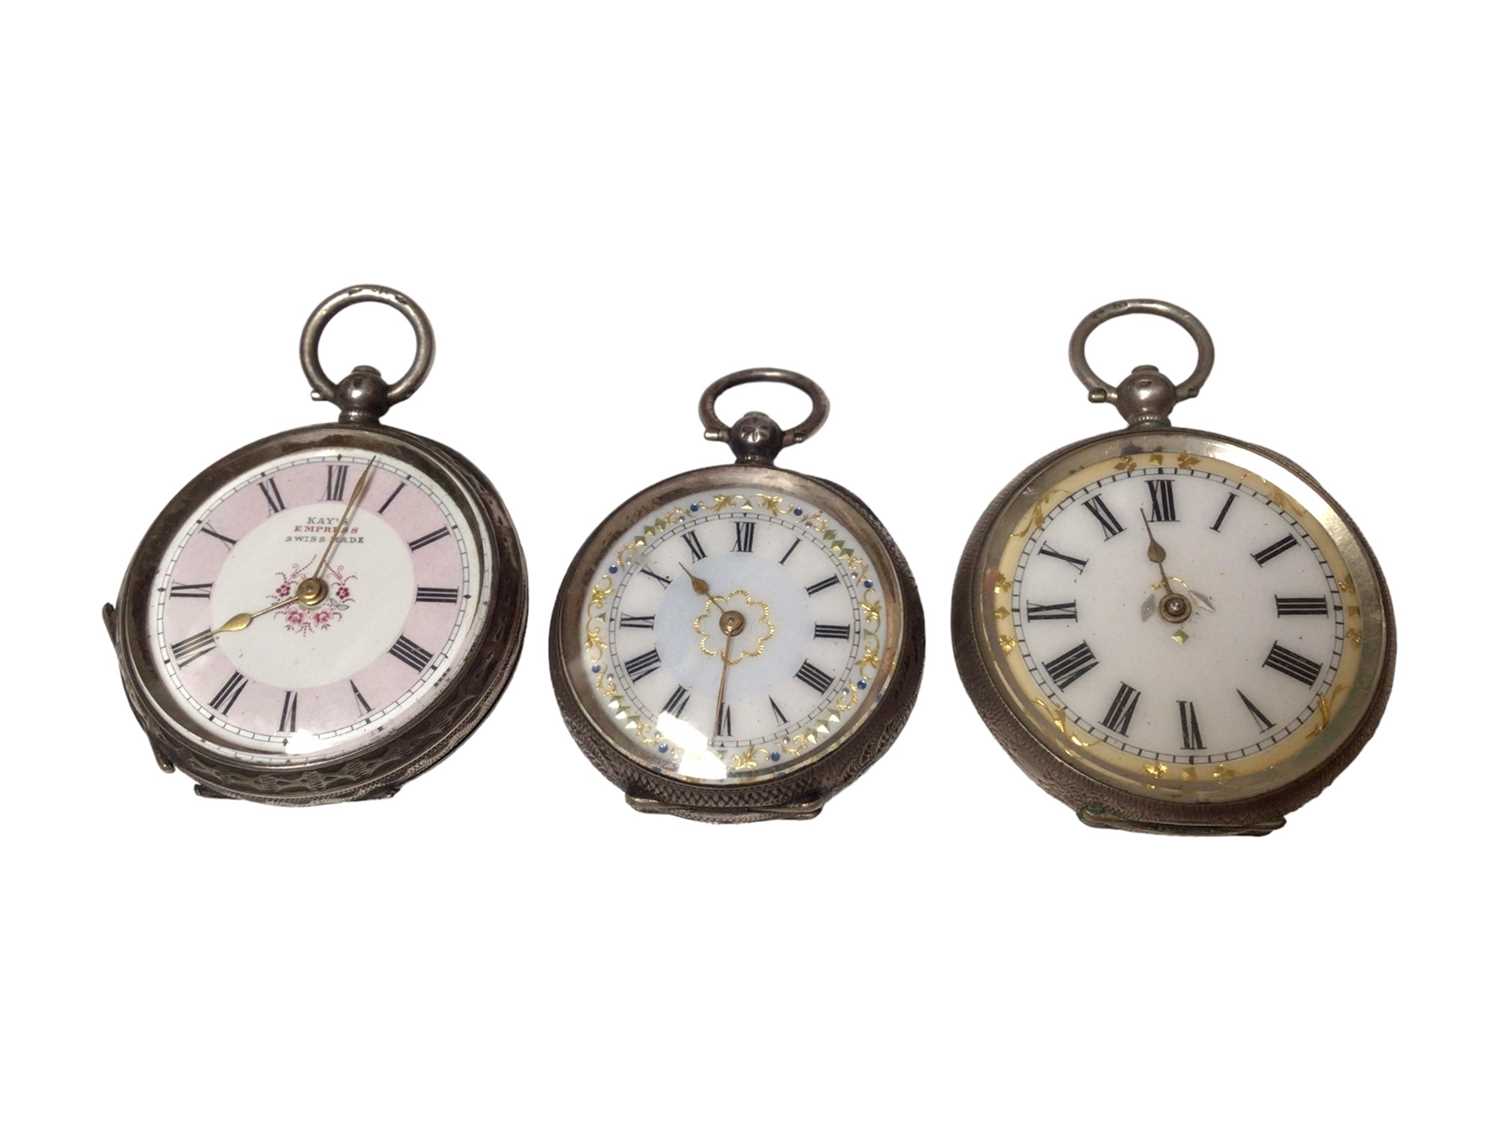 Three late 19th century ladies silver fob watches with painted and jewelled enamel dials